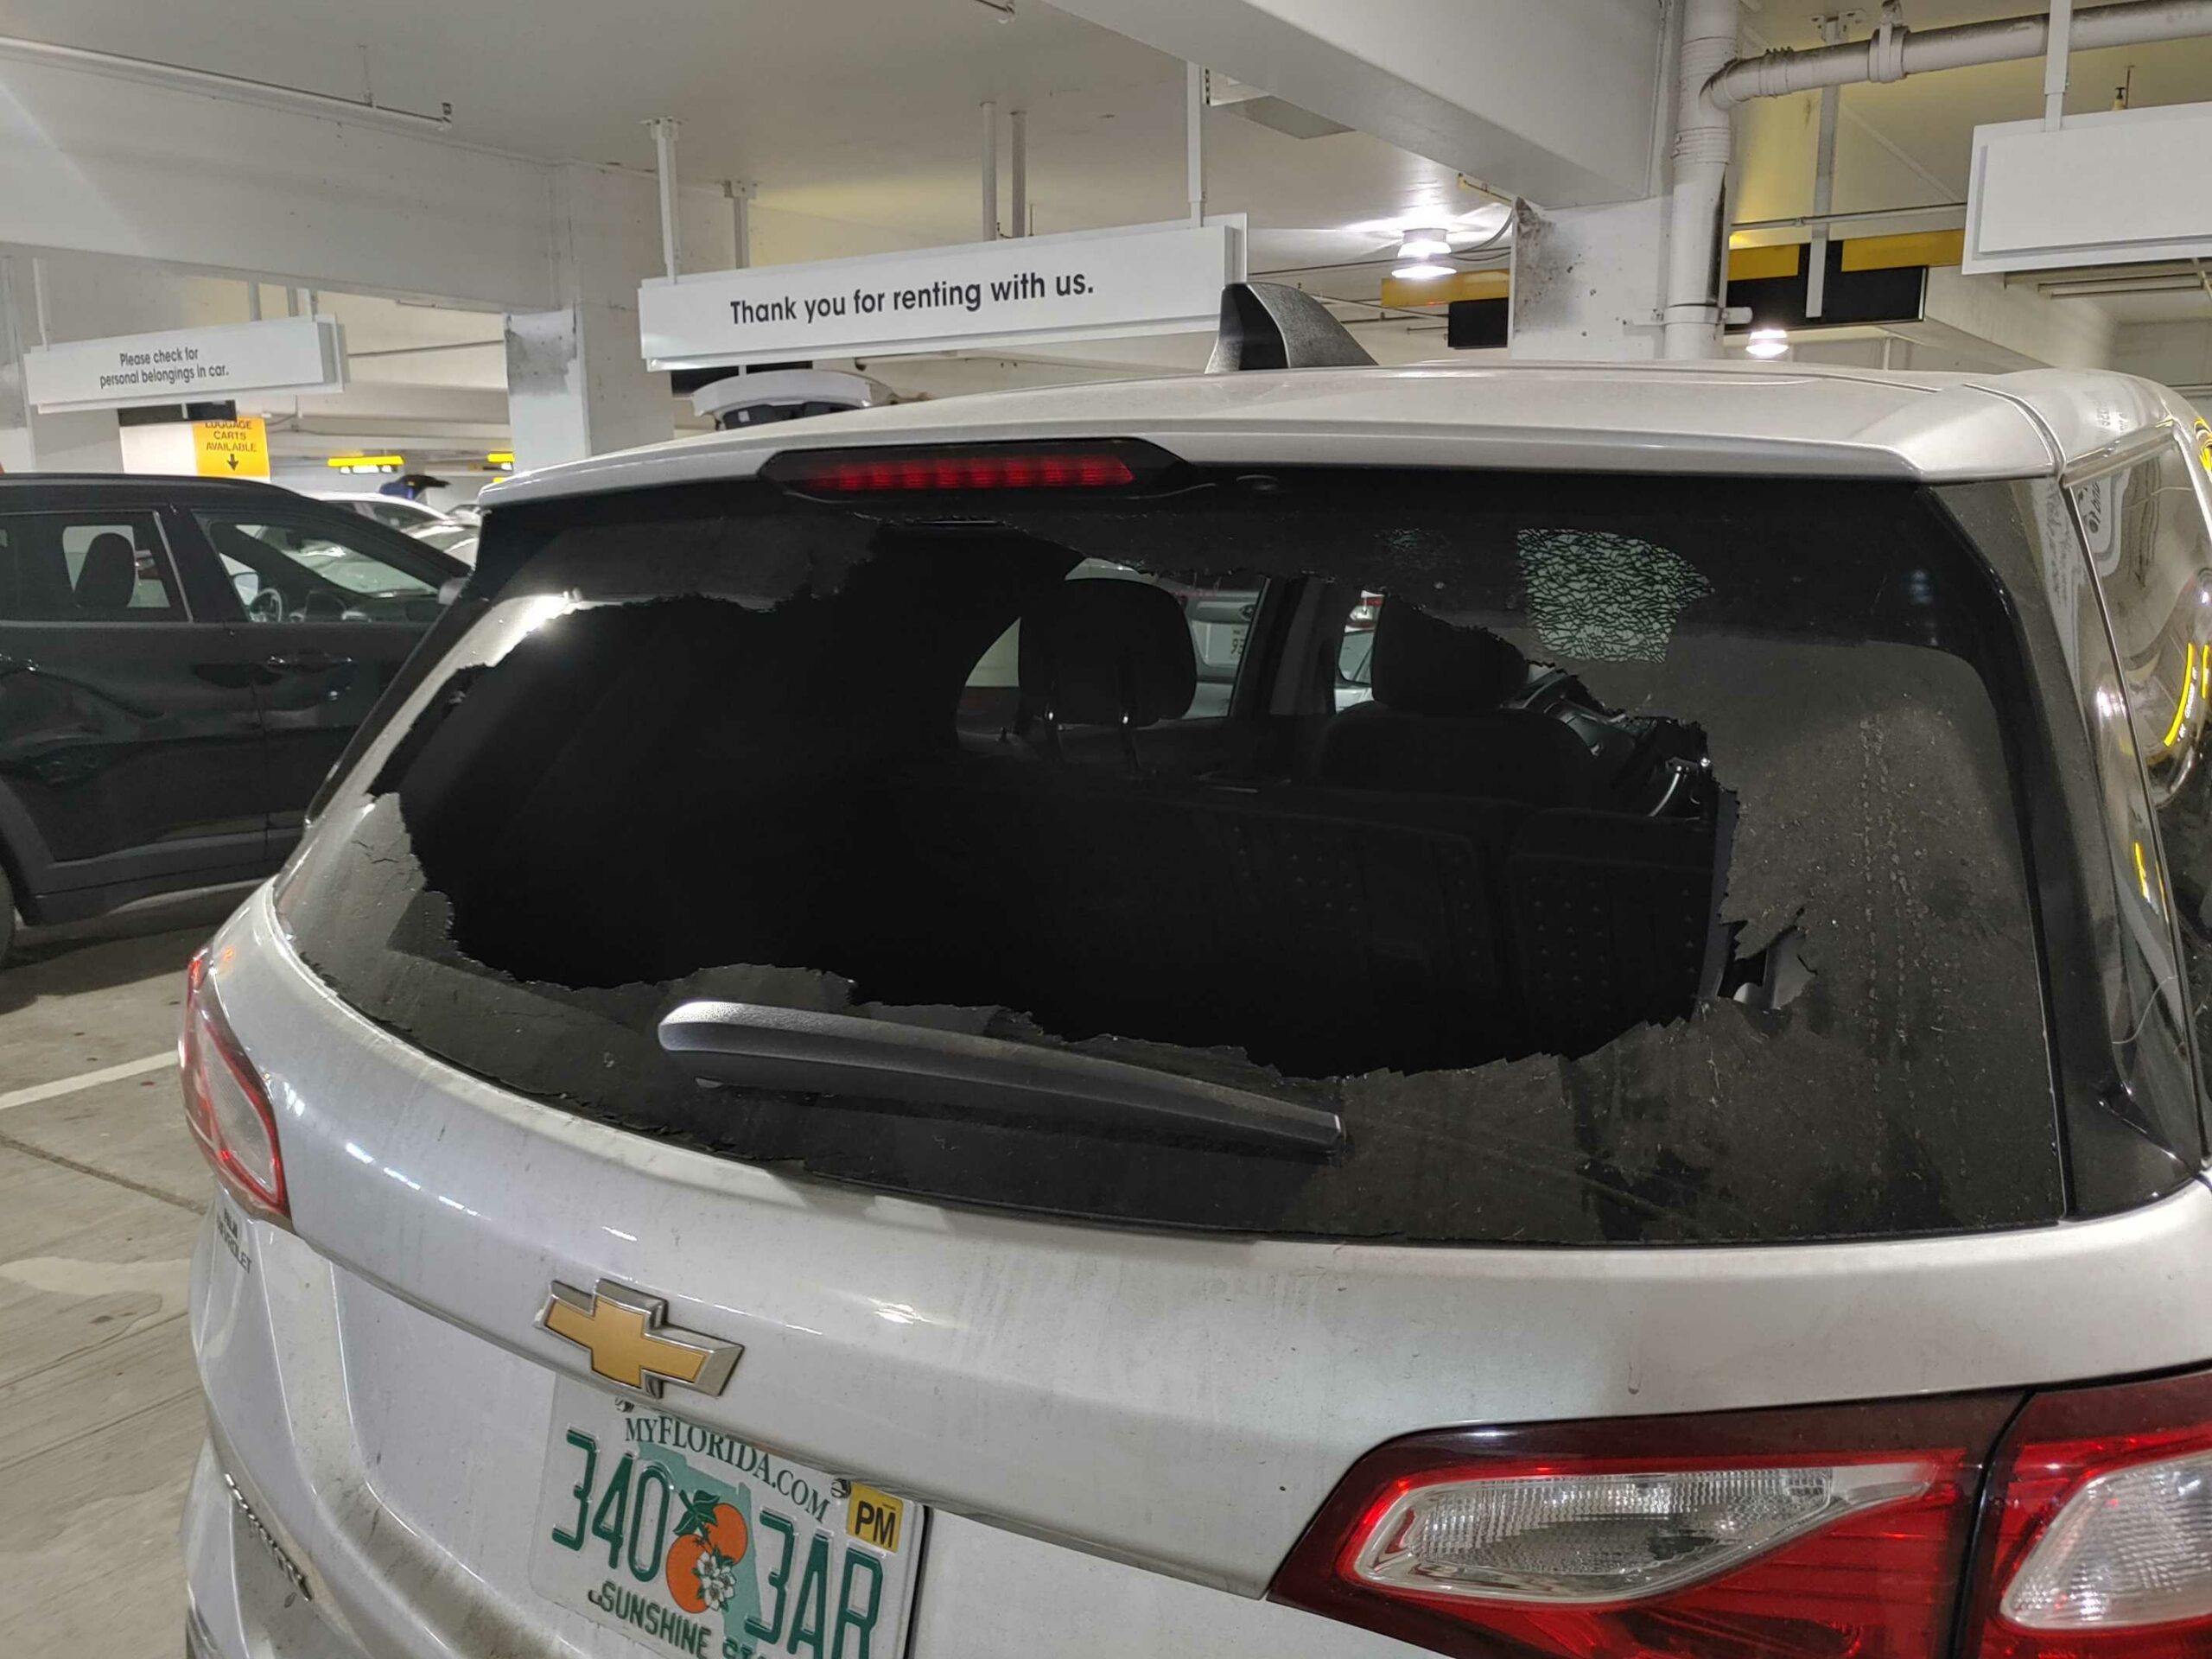 ‘30 Cars a Day’: Thieves Target Bay Area Rental Cars